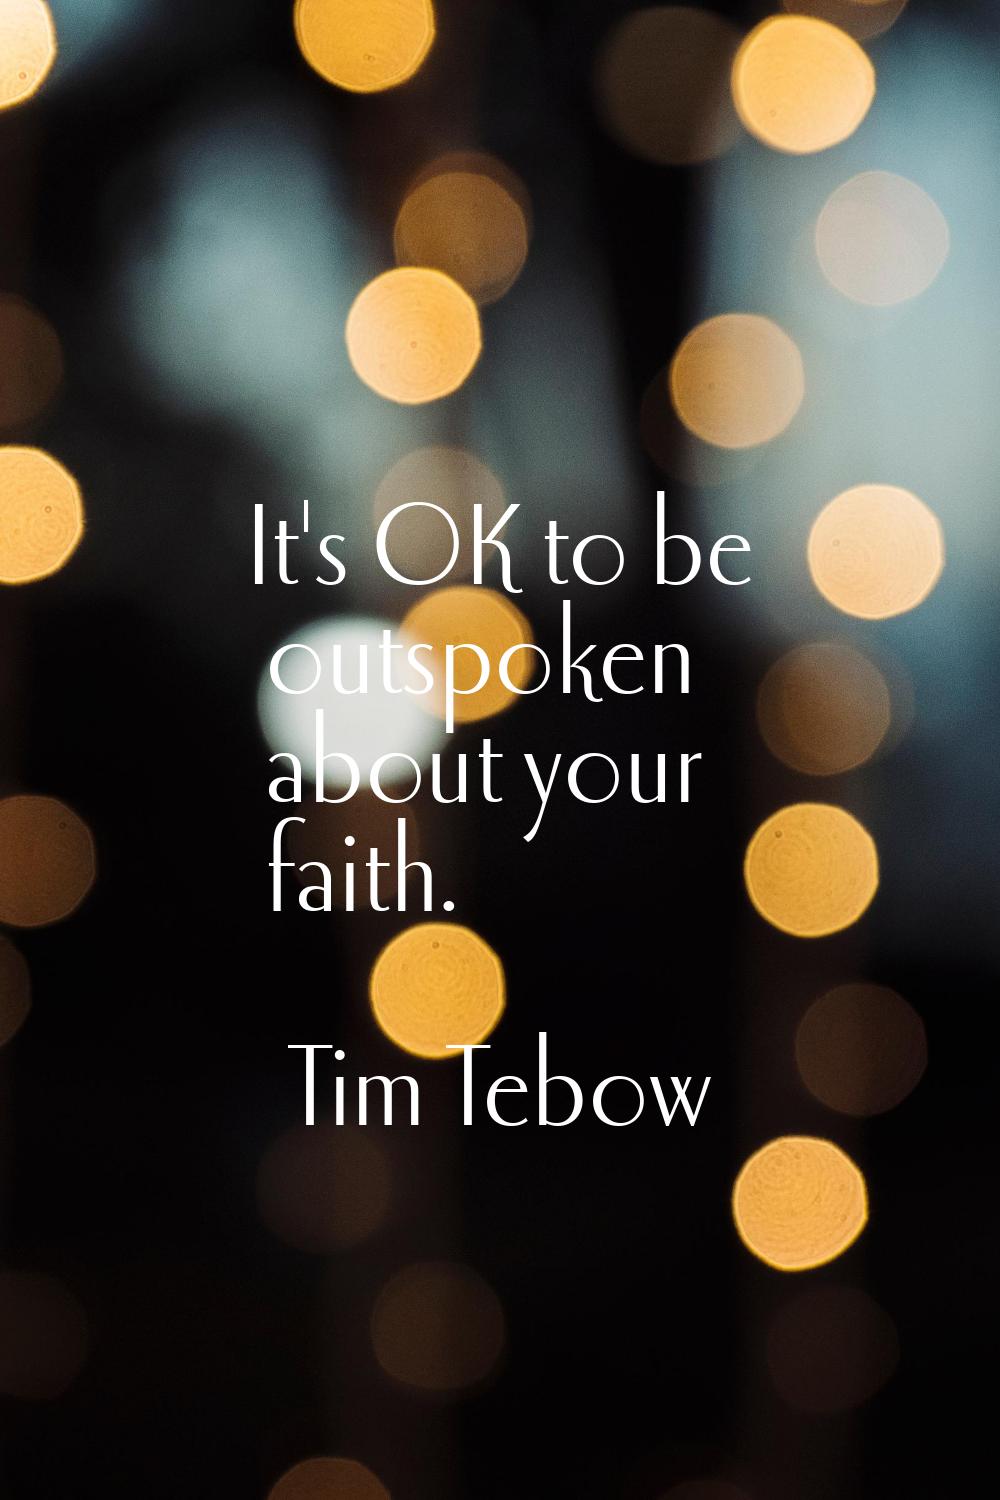 It's OK to be outspoken about your faith.